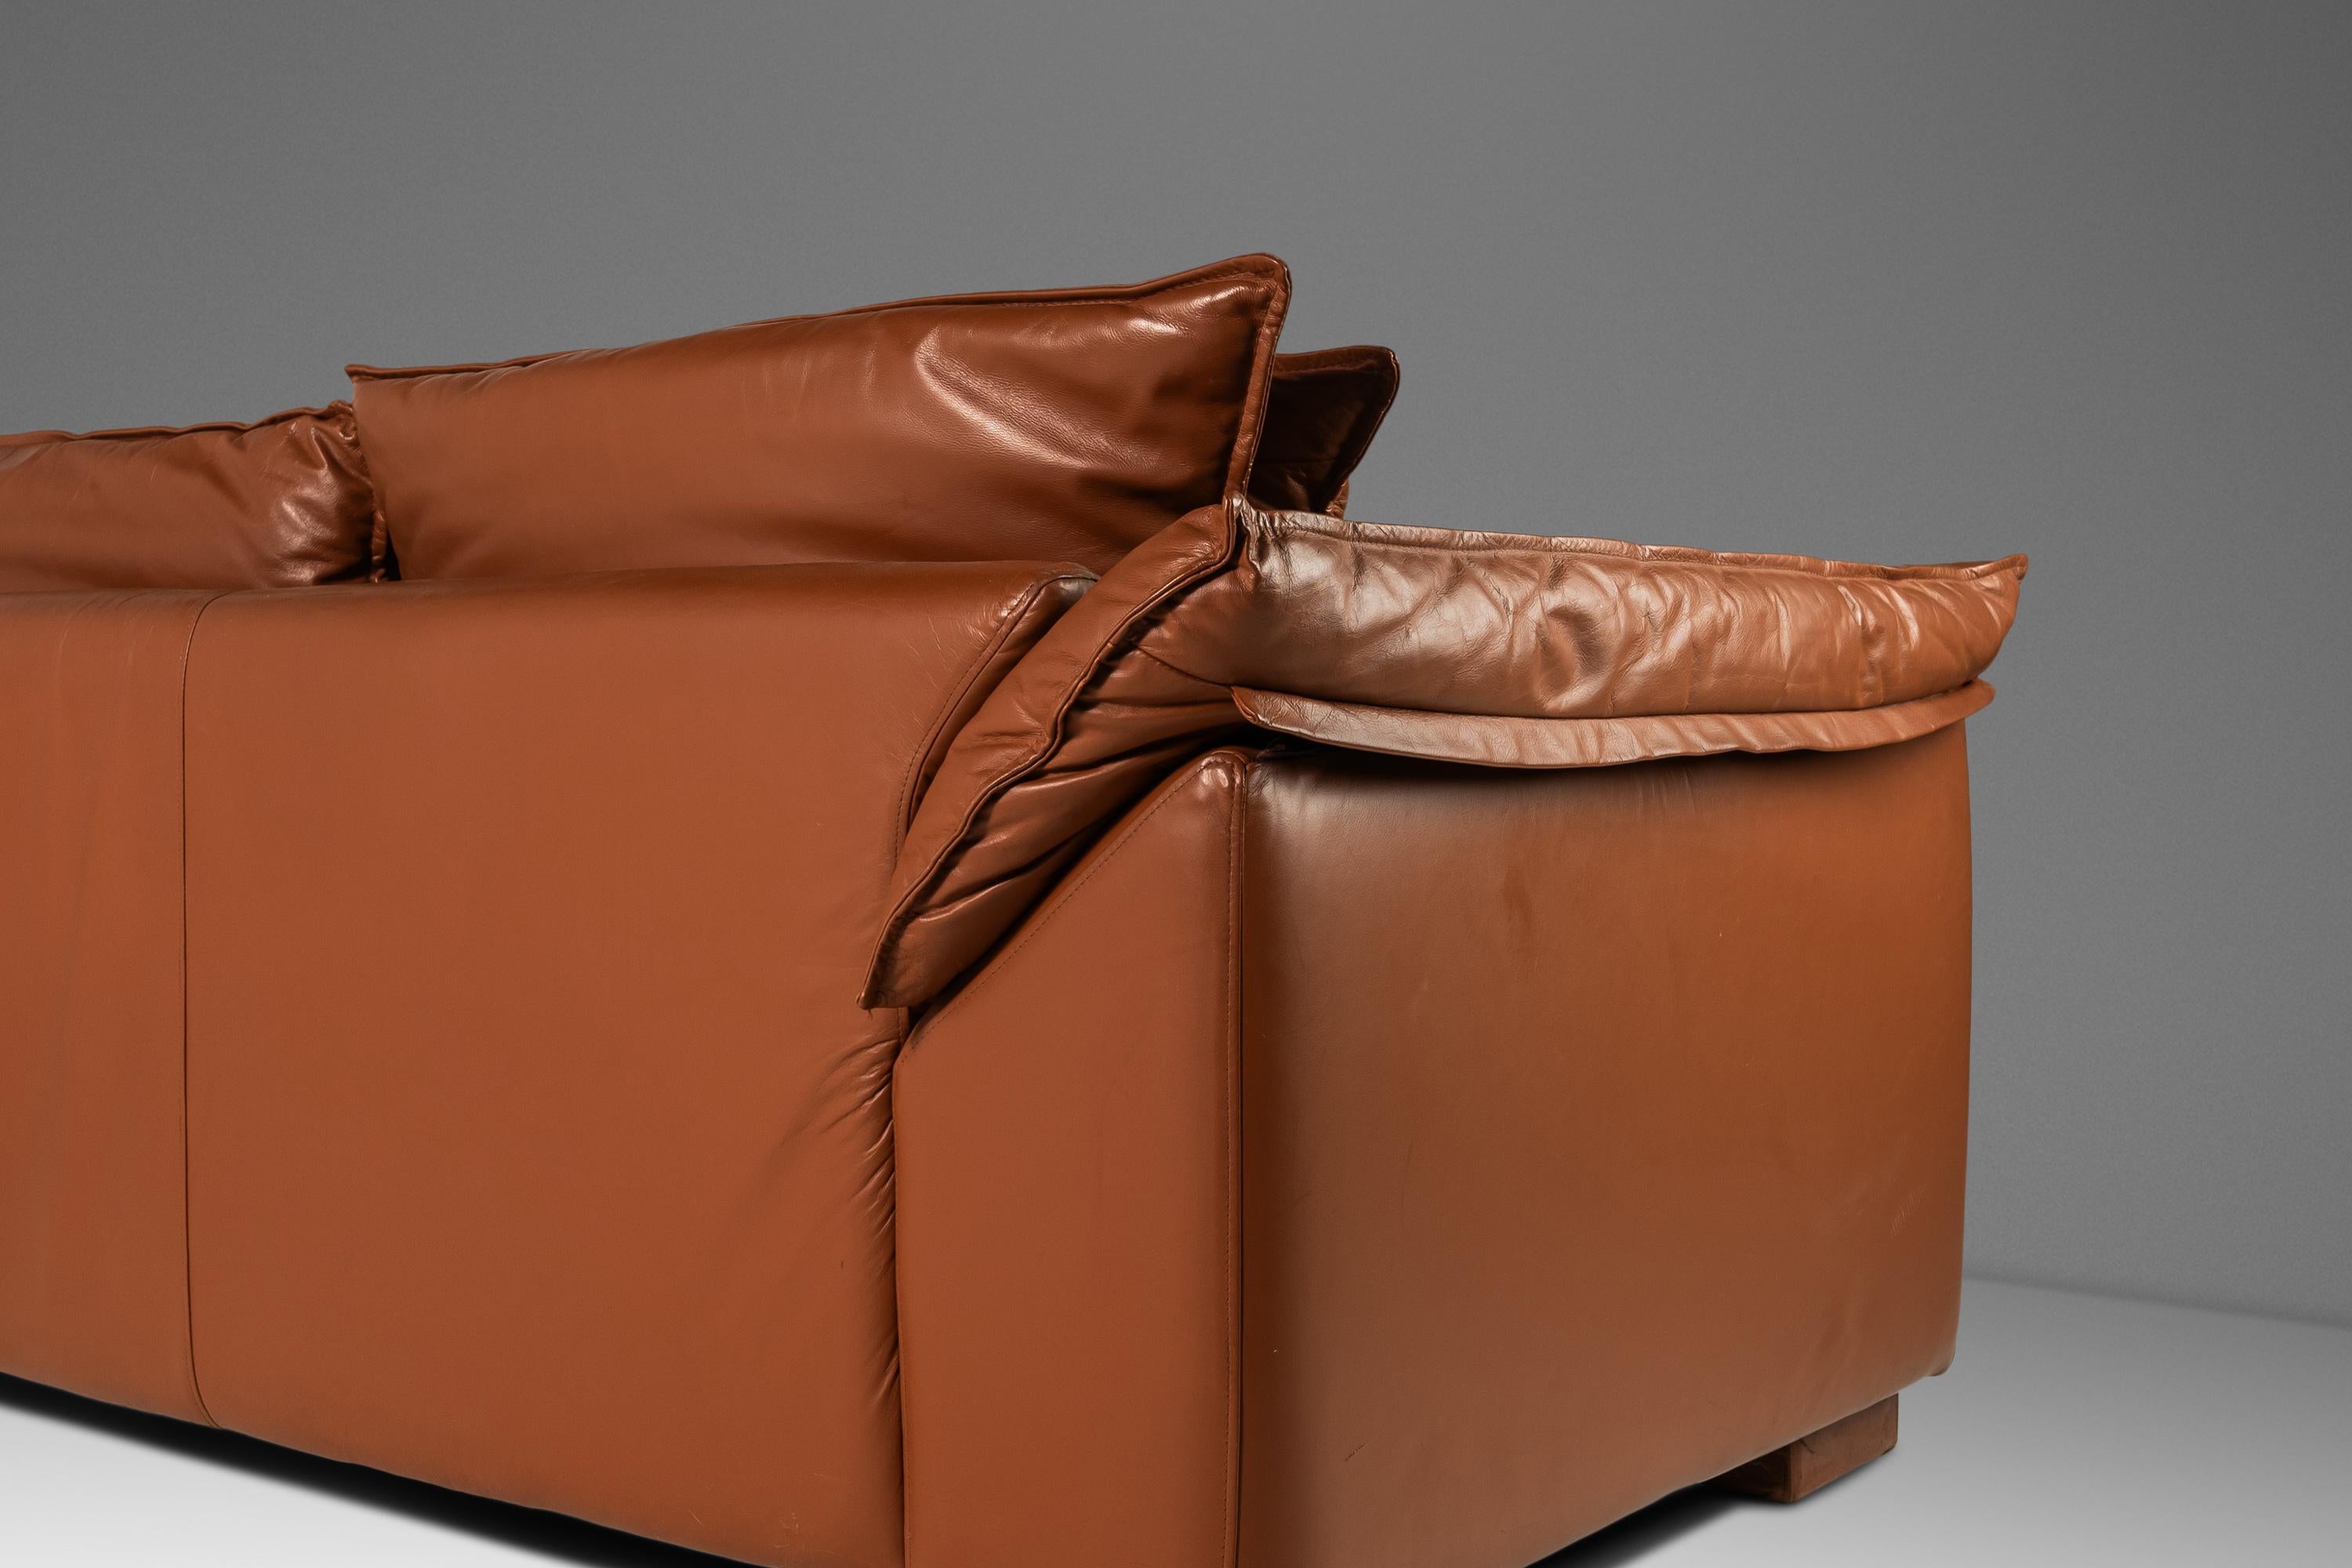 Low Profile Loveseat Sofa in Leather in the Manner of Niels Eilersen, c. 1980's For Sale 1